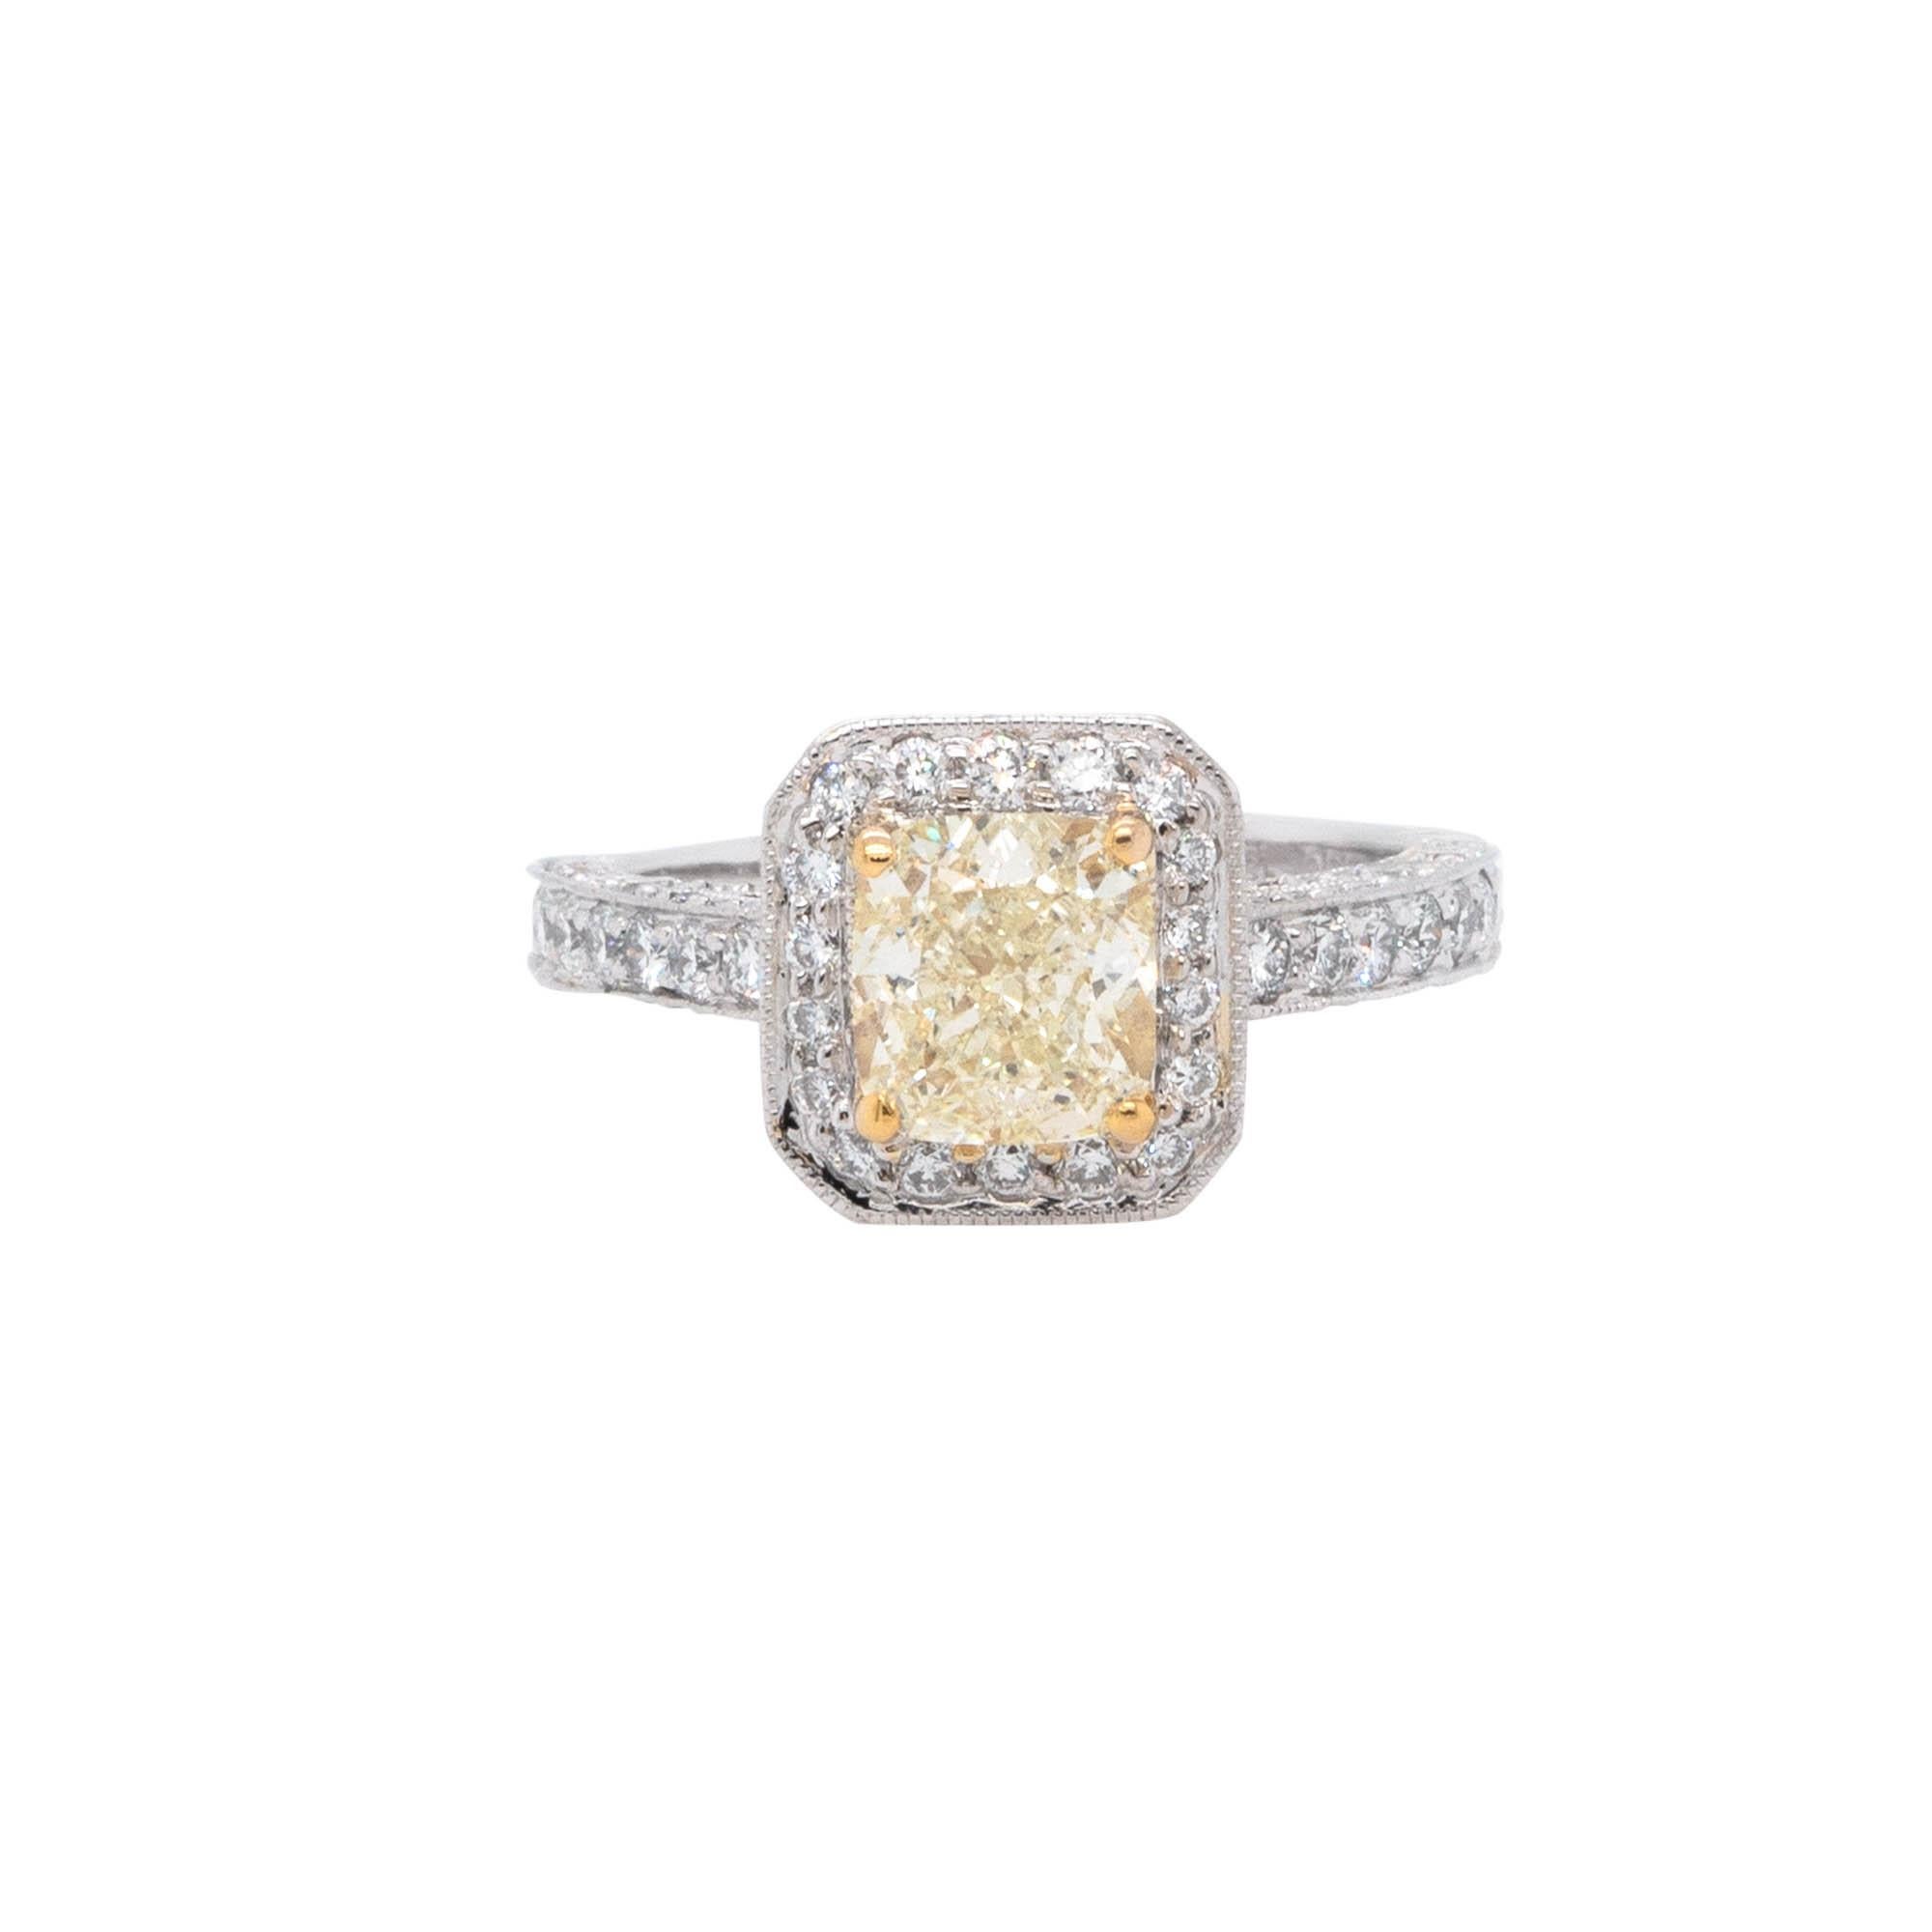 This is a ring that features a 1.74ct natural cushion cut diamond in a fancy yellow color with a diamond halo. It is made of platinum and 18k yellow gold and has 1.00ctw of round cut natural diamonds with G/H color and VS clarity. The ring comes in